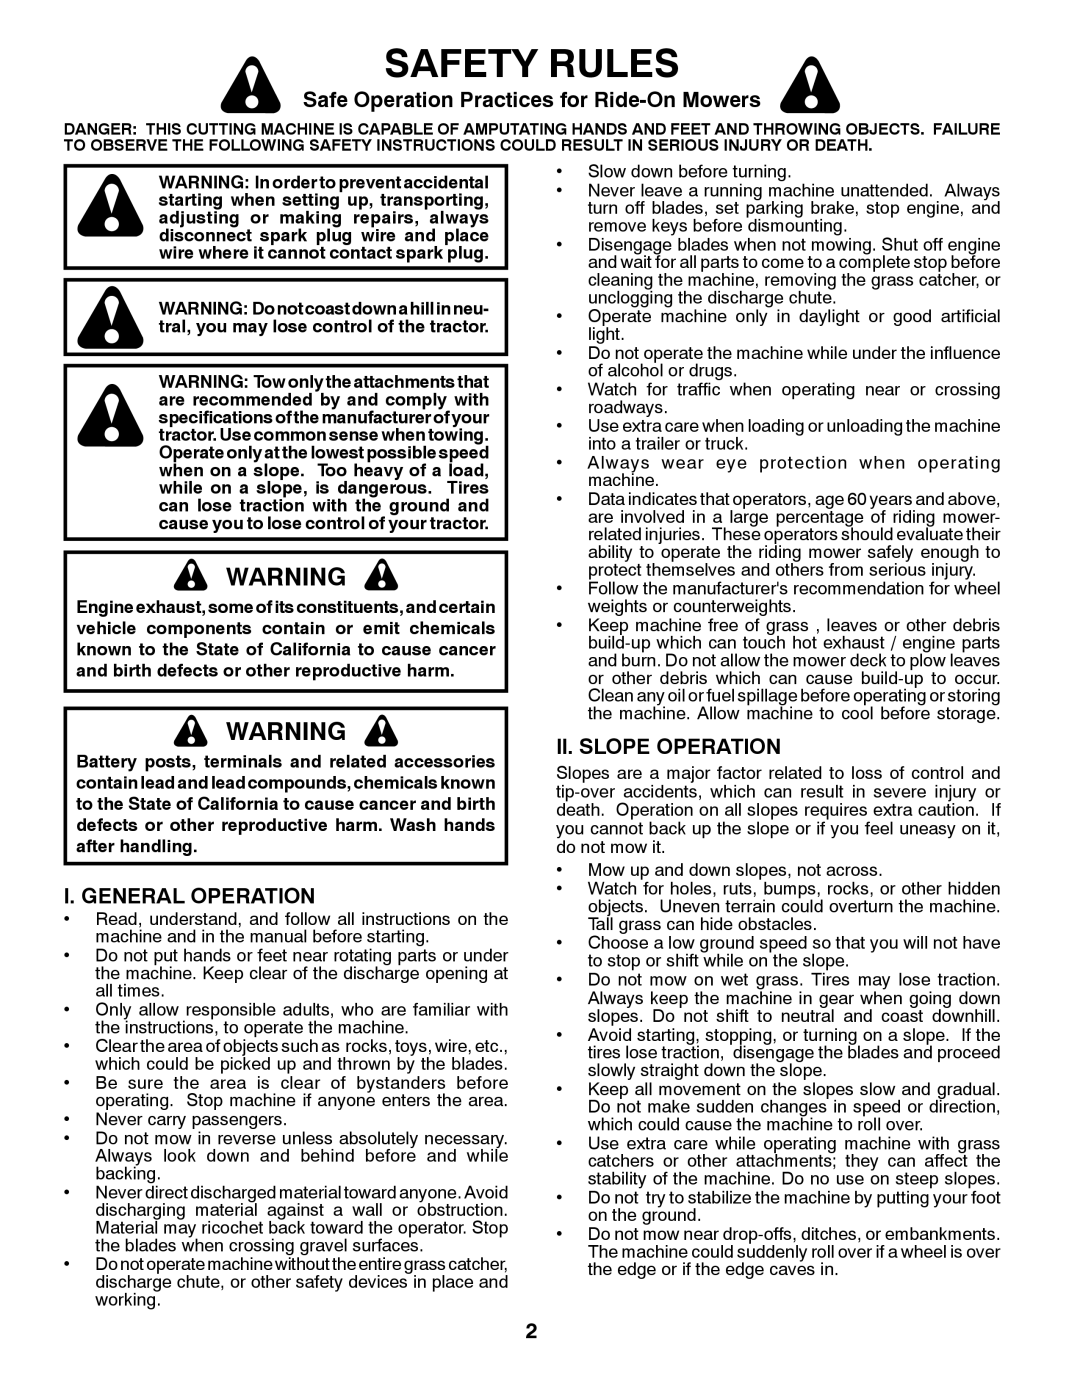 Poulan 96012011100 Safety Rules, Safe Operation Practices for Ride-On Mowers, I. General Operation, Ii. Slope Operation 